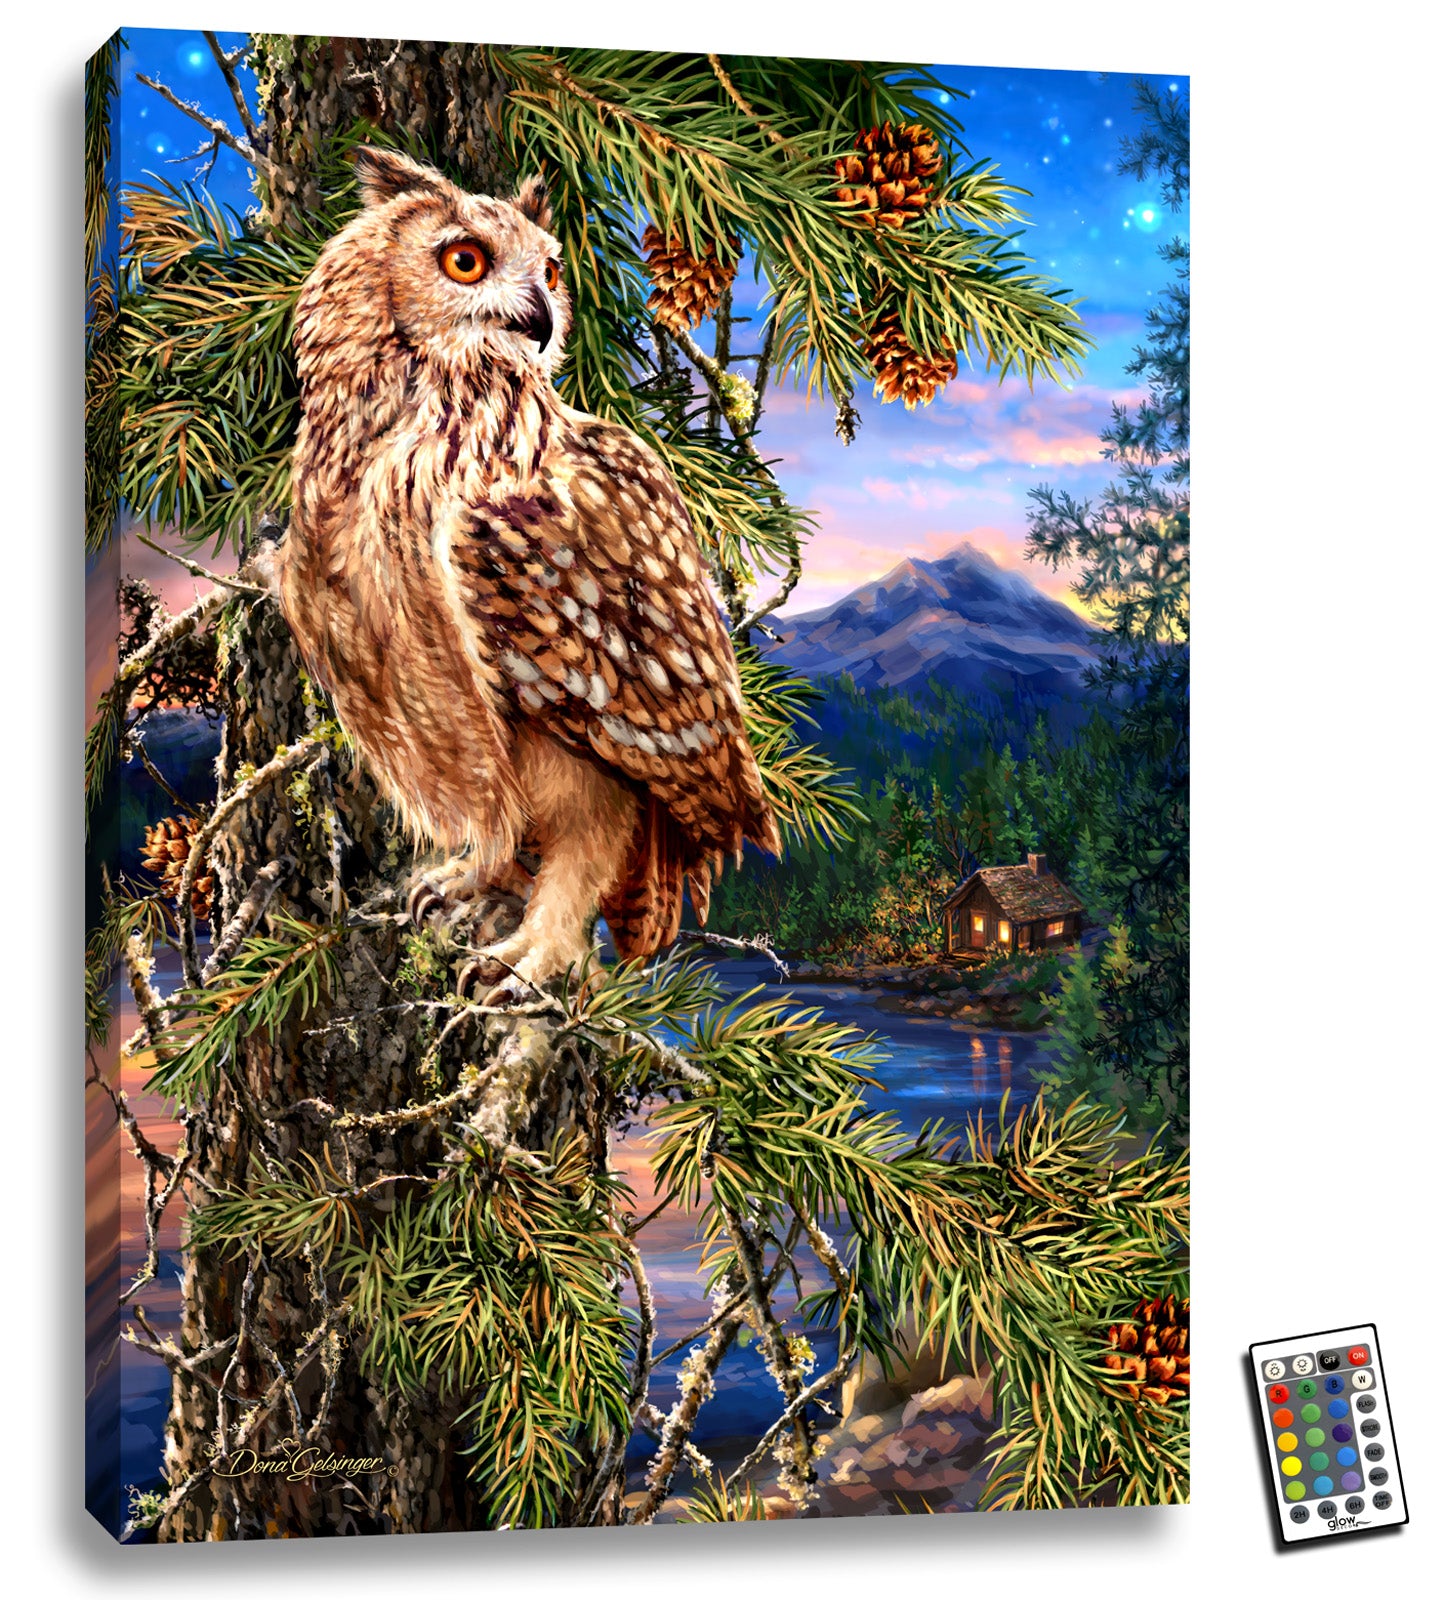 Featuring a majestic owl perched on a pine tree. Behind the owl, you'll find a cozy cabin sitting on the edge of a shimmering lake, surrounded by the lush greenery of the woods.